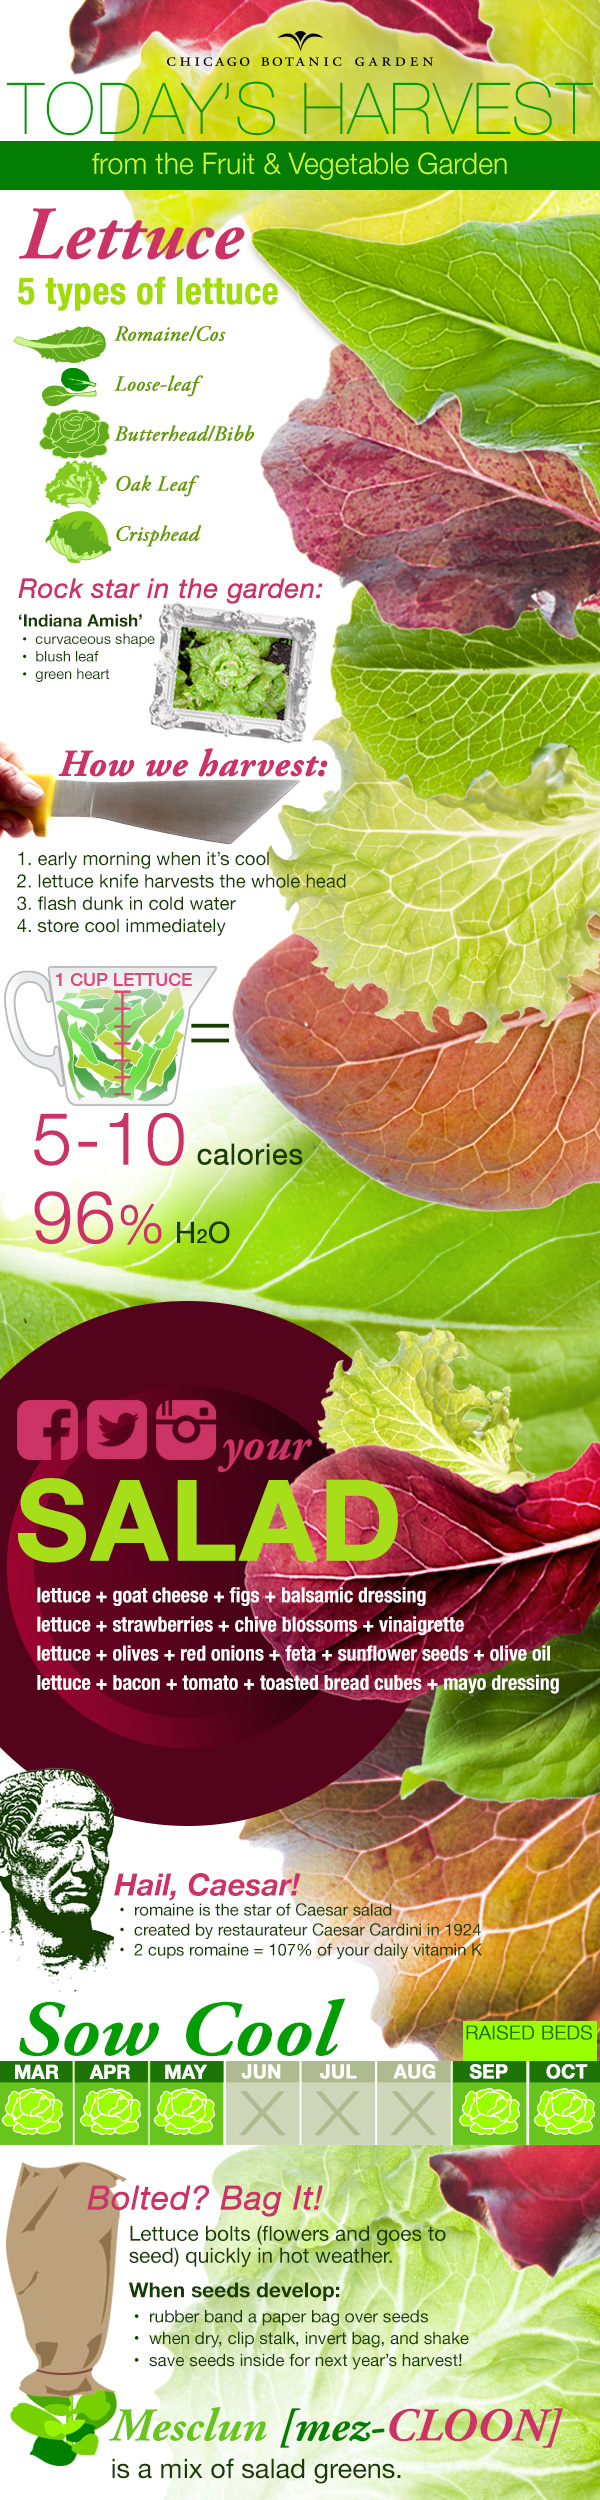 Infographic on cultivating and harvesting lettuce.